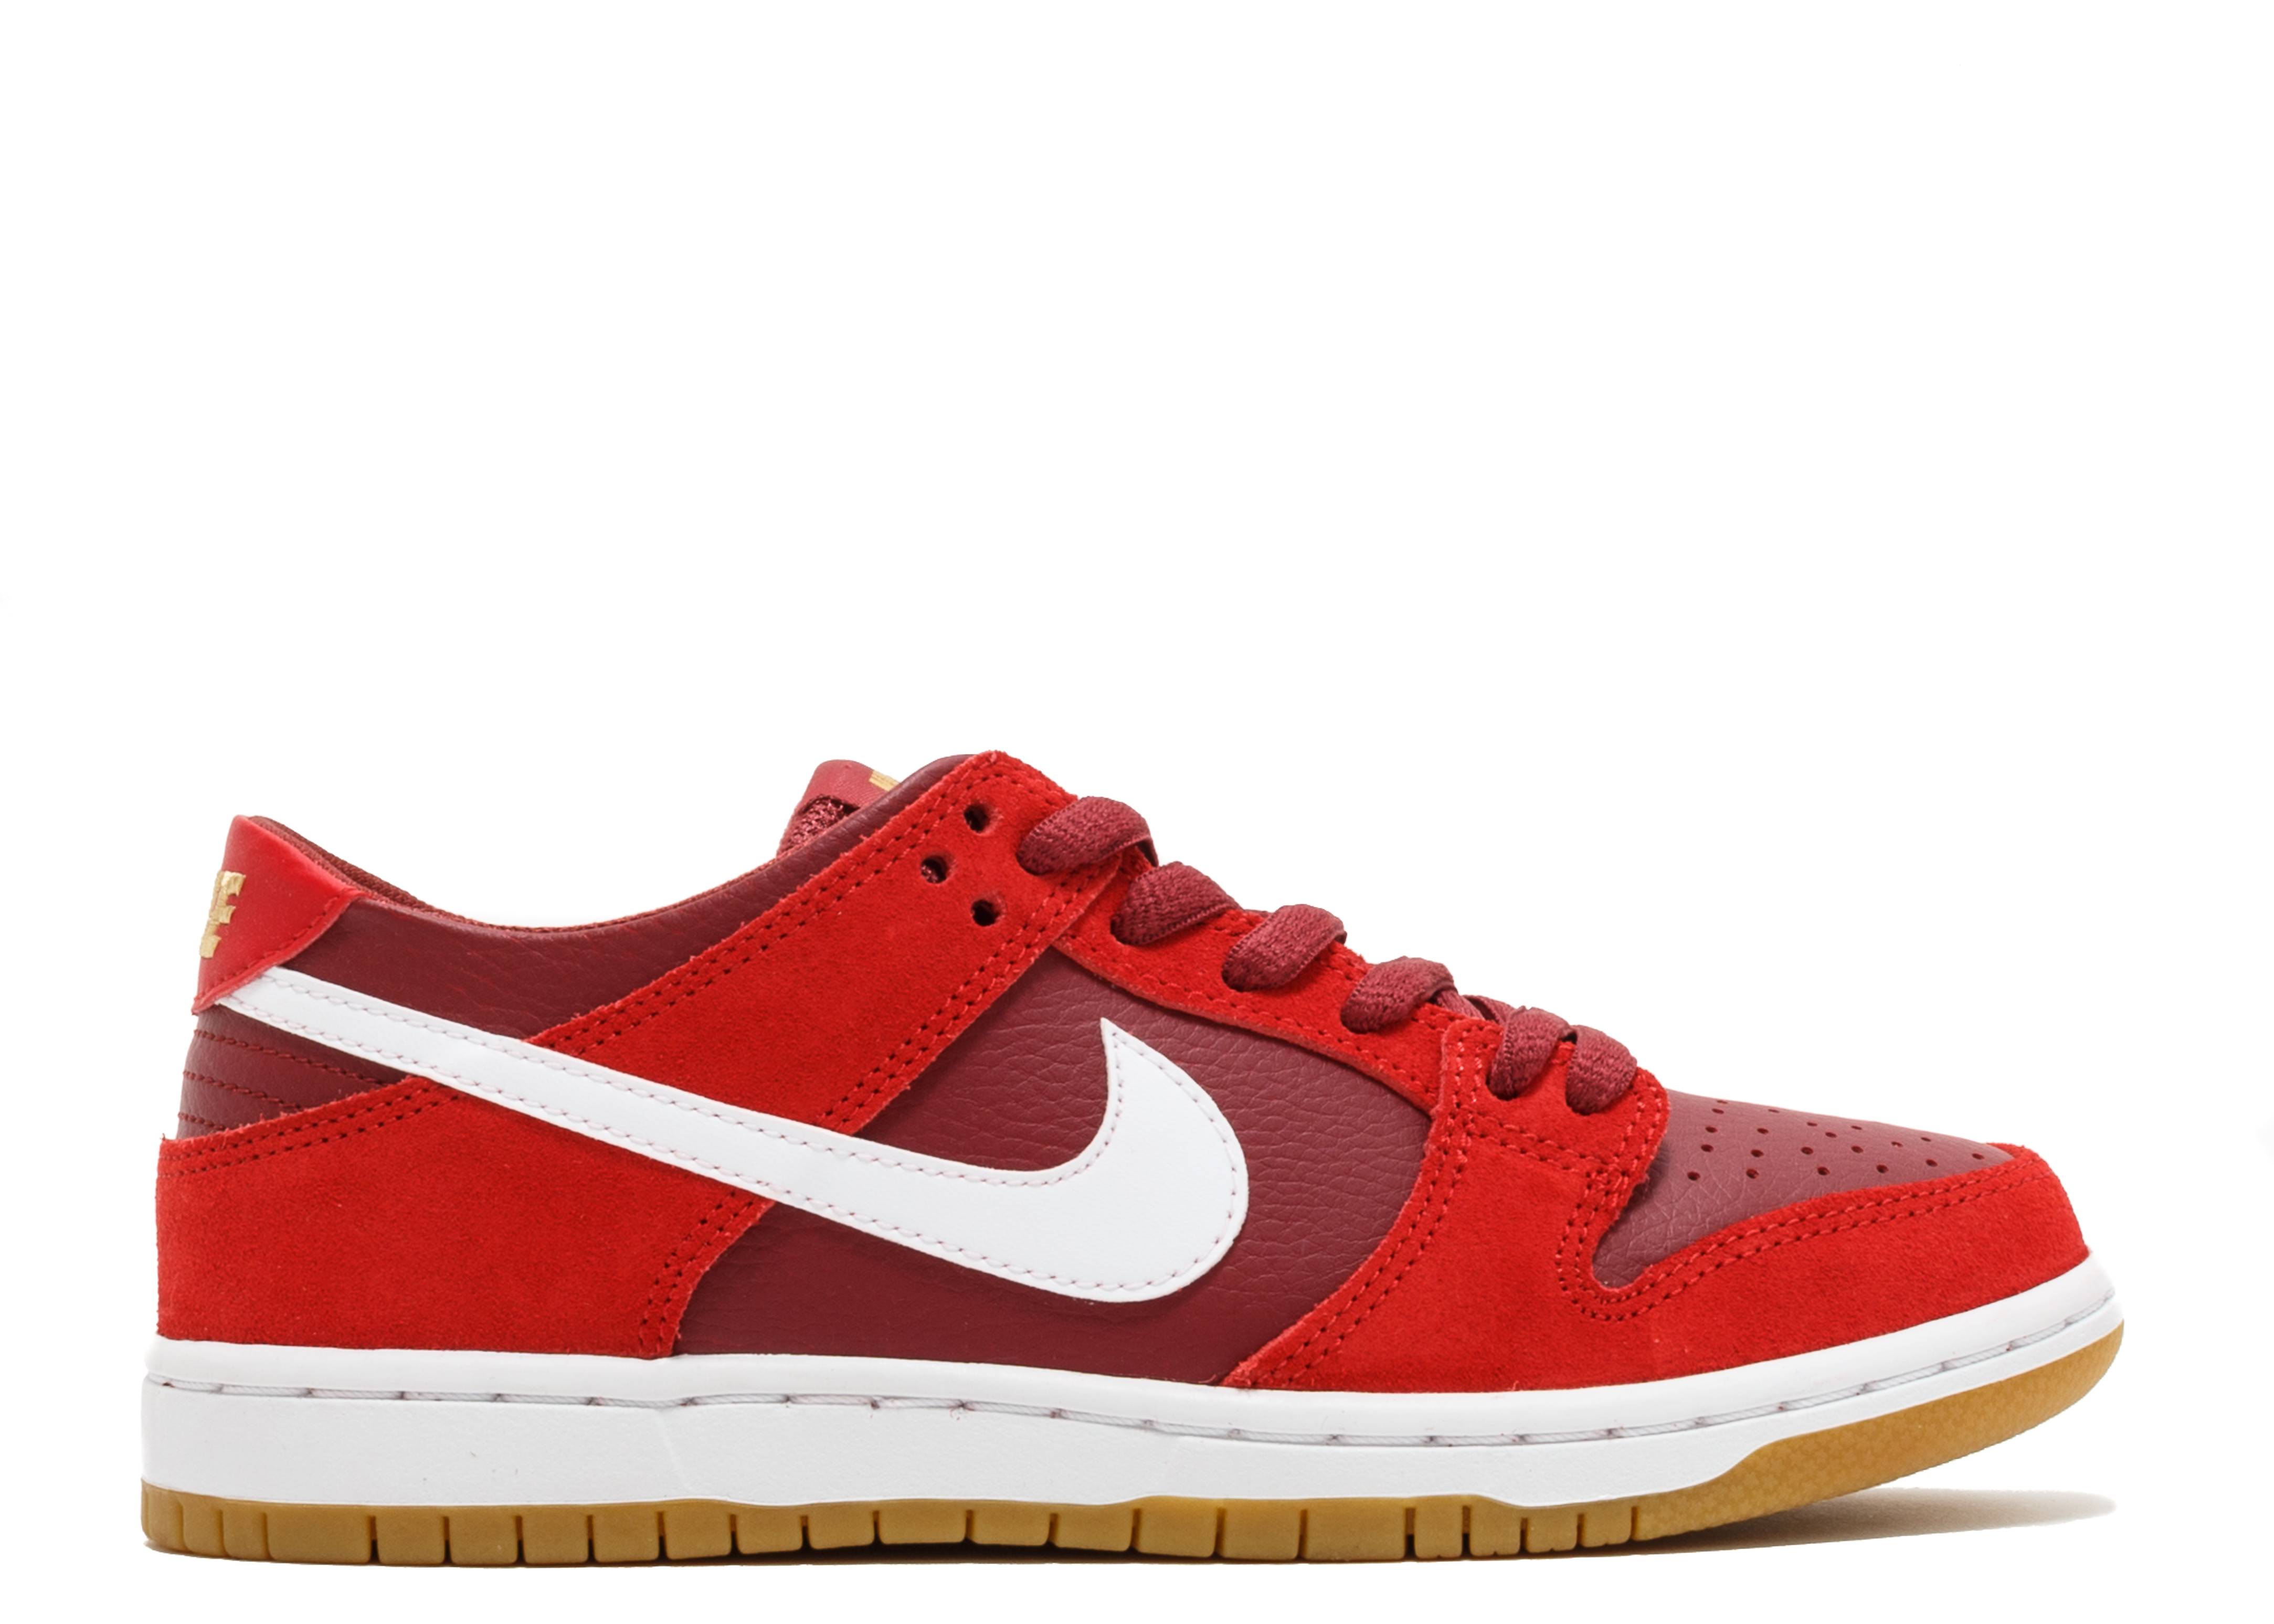 Zoom Dunk Low Pro SB 'Track Red'